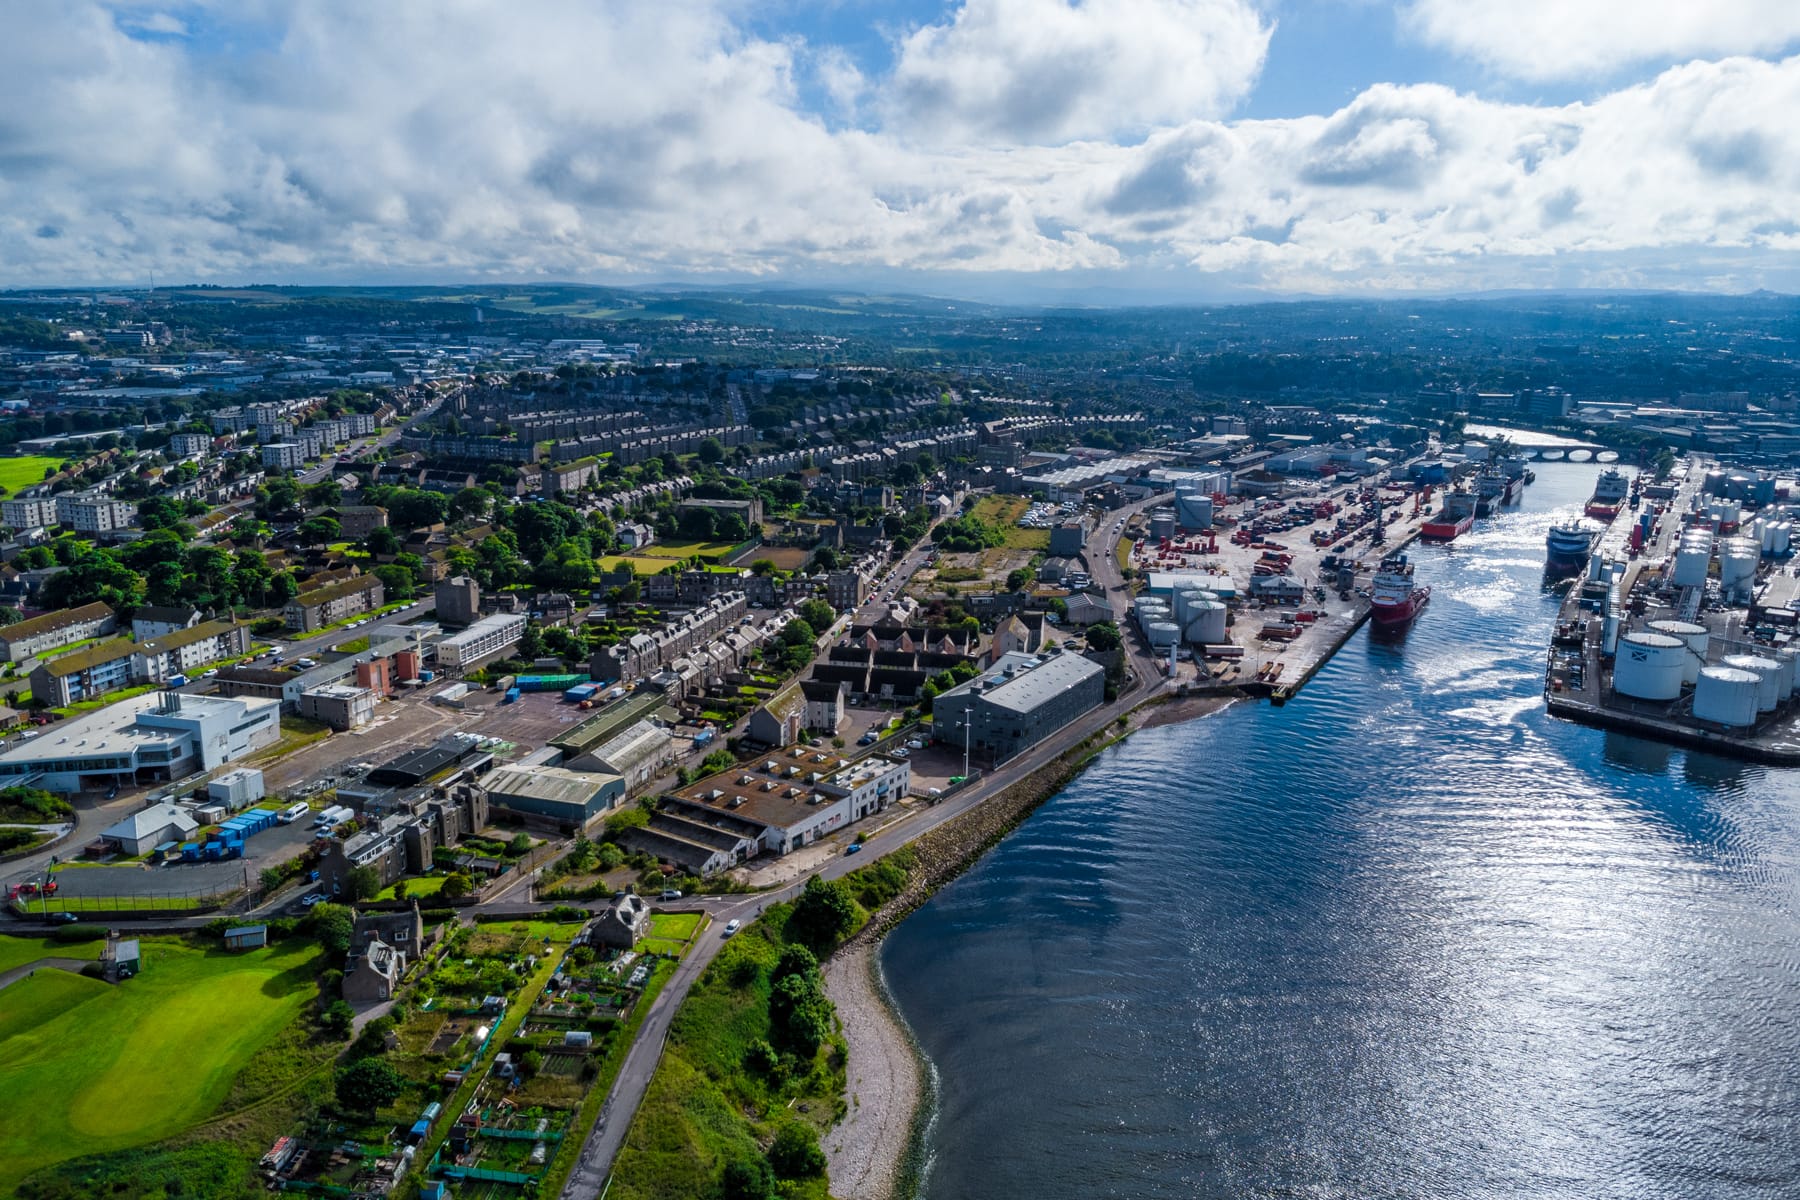 Aerial view of Aberdeen Harbour with Torry on the left. The River Dee, ships, industrial docks, and residential areas are visible on the right.